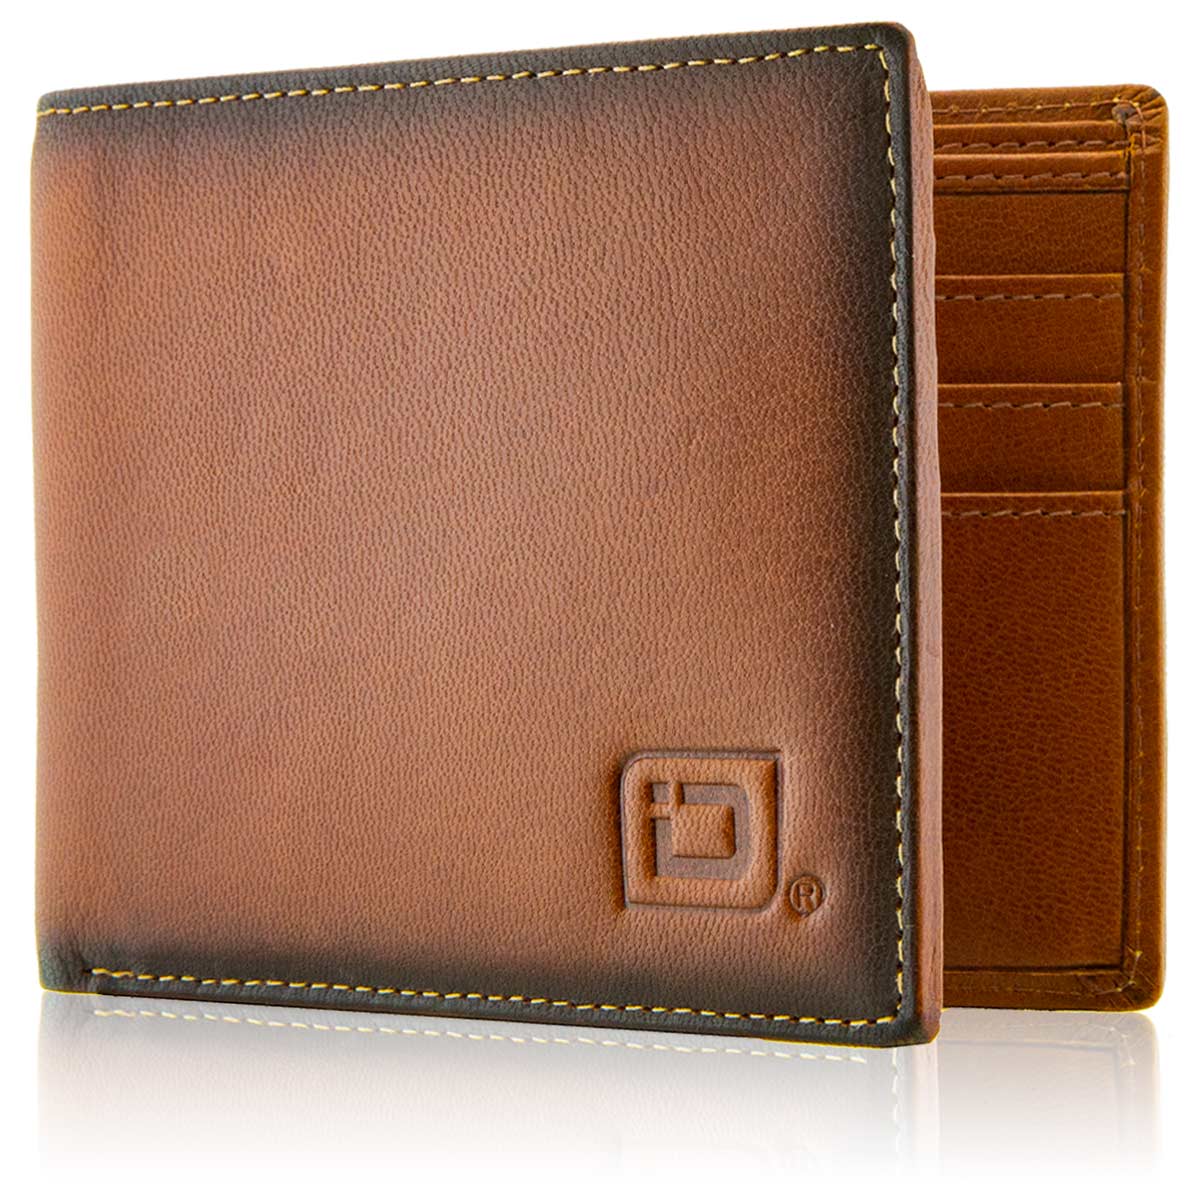  Leather Trifold Wallets for Men - RFID Blocking - Mens